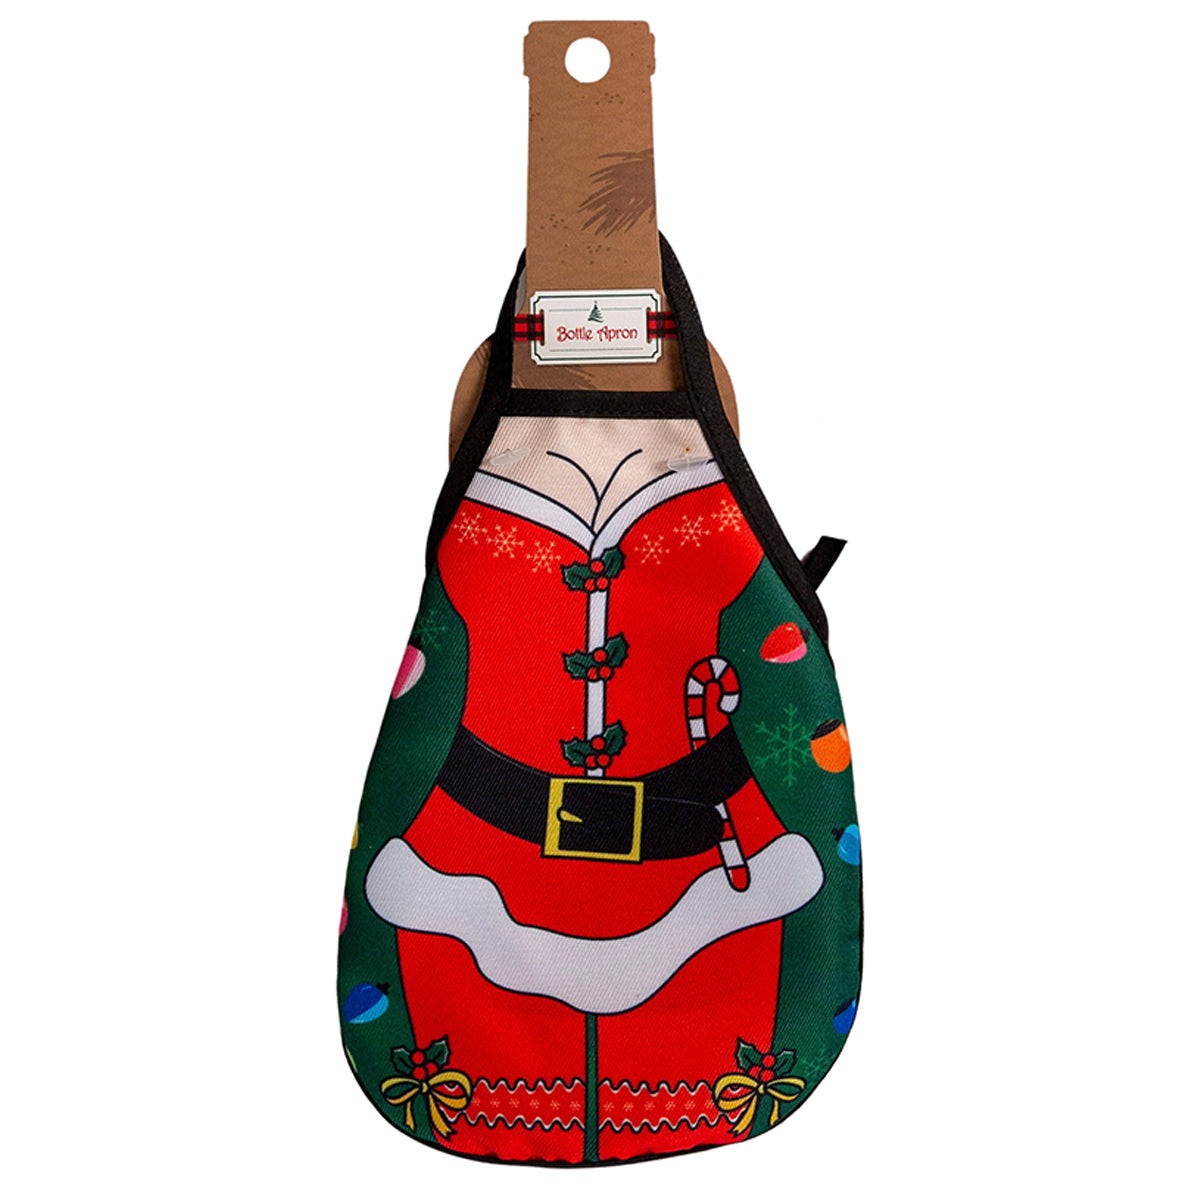 Holiday Bottle Apron for Wine & Beer - Cuter Than A Gift Bag!